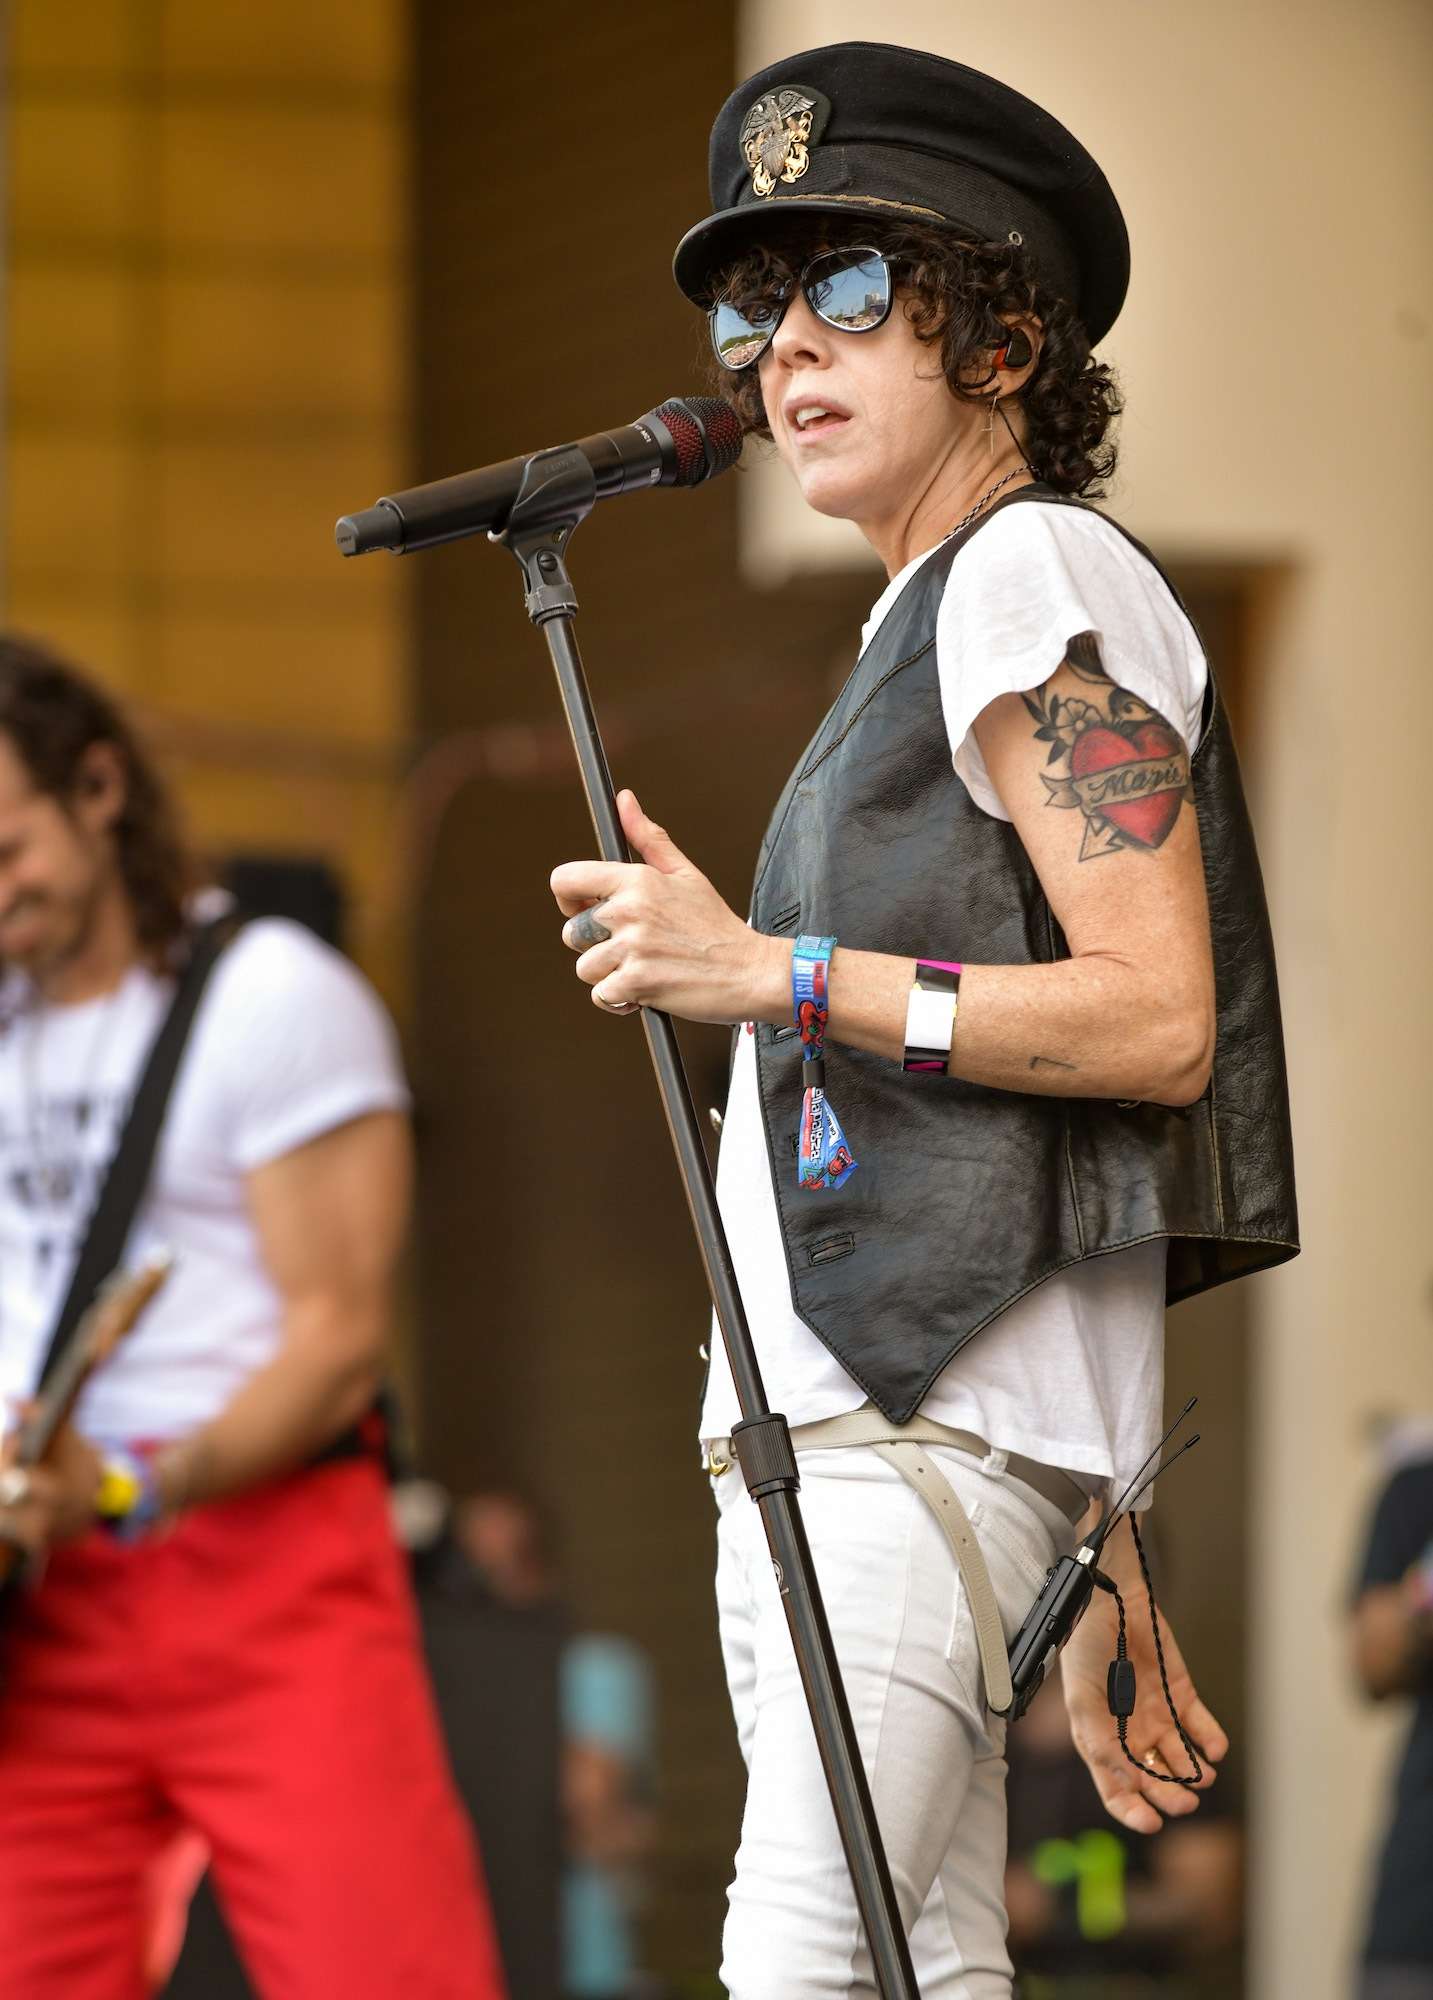 LP Live at Lollapalooza [GALLERY] 7